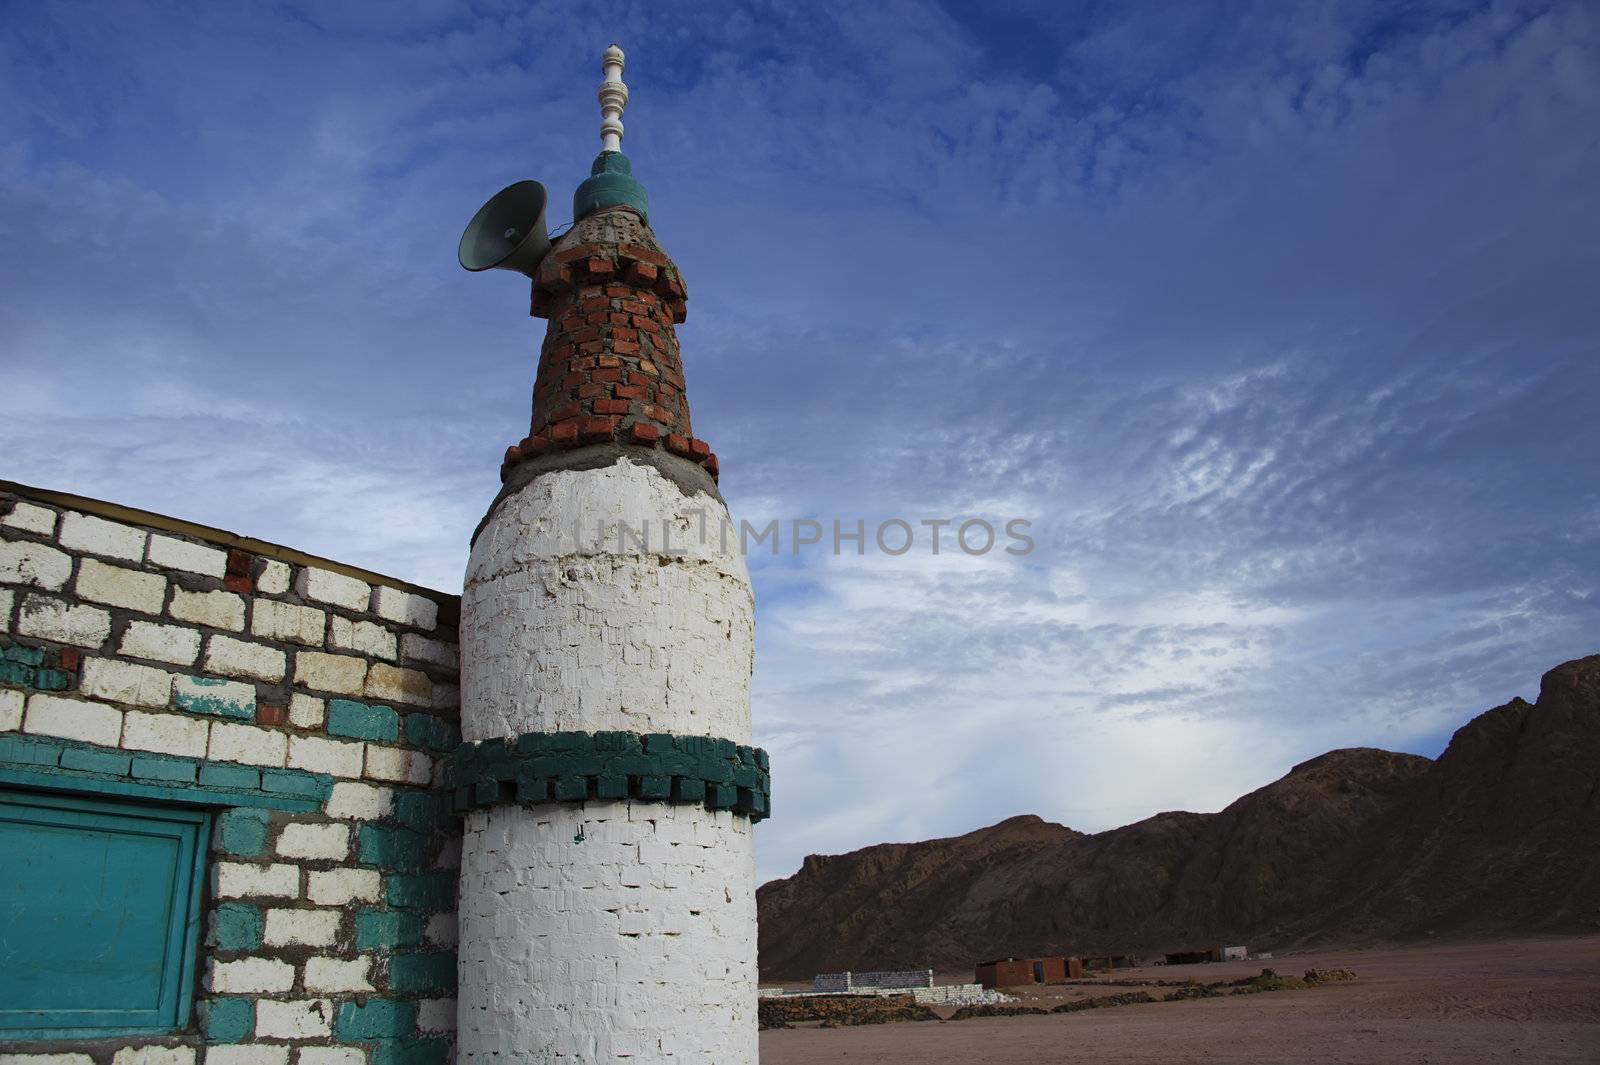 the mosque of settlement of Bedouin tribe in Sahara desert near Hurghada by jackq